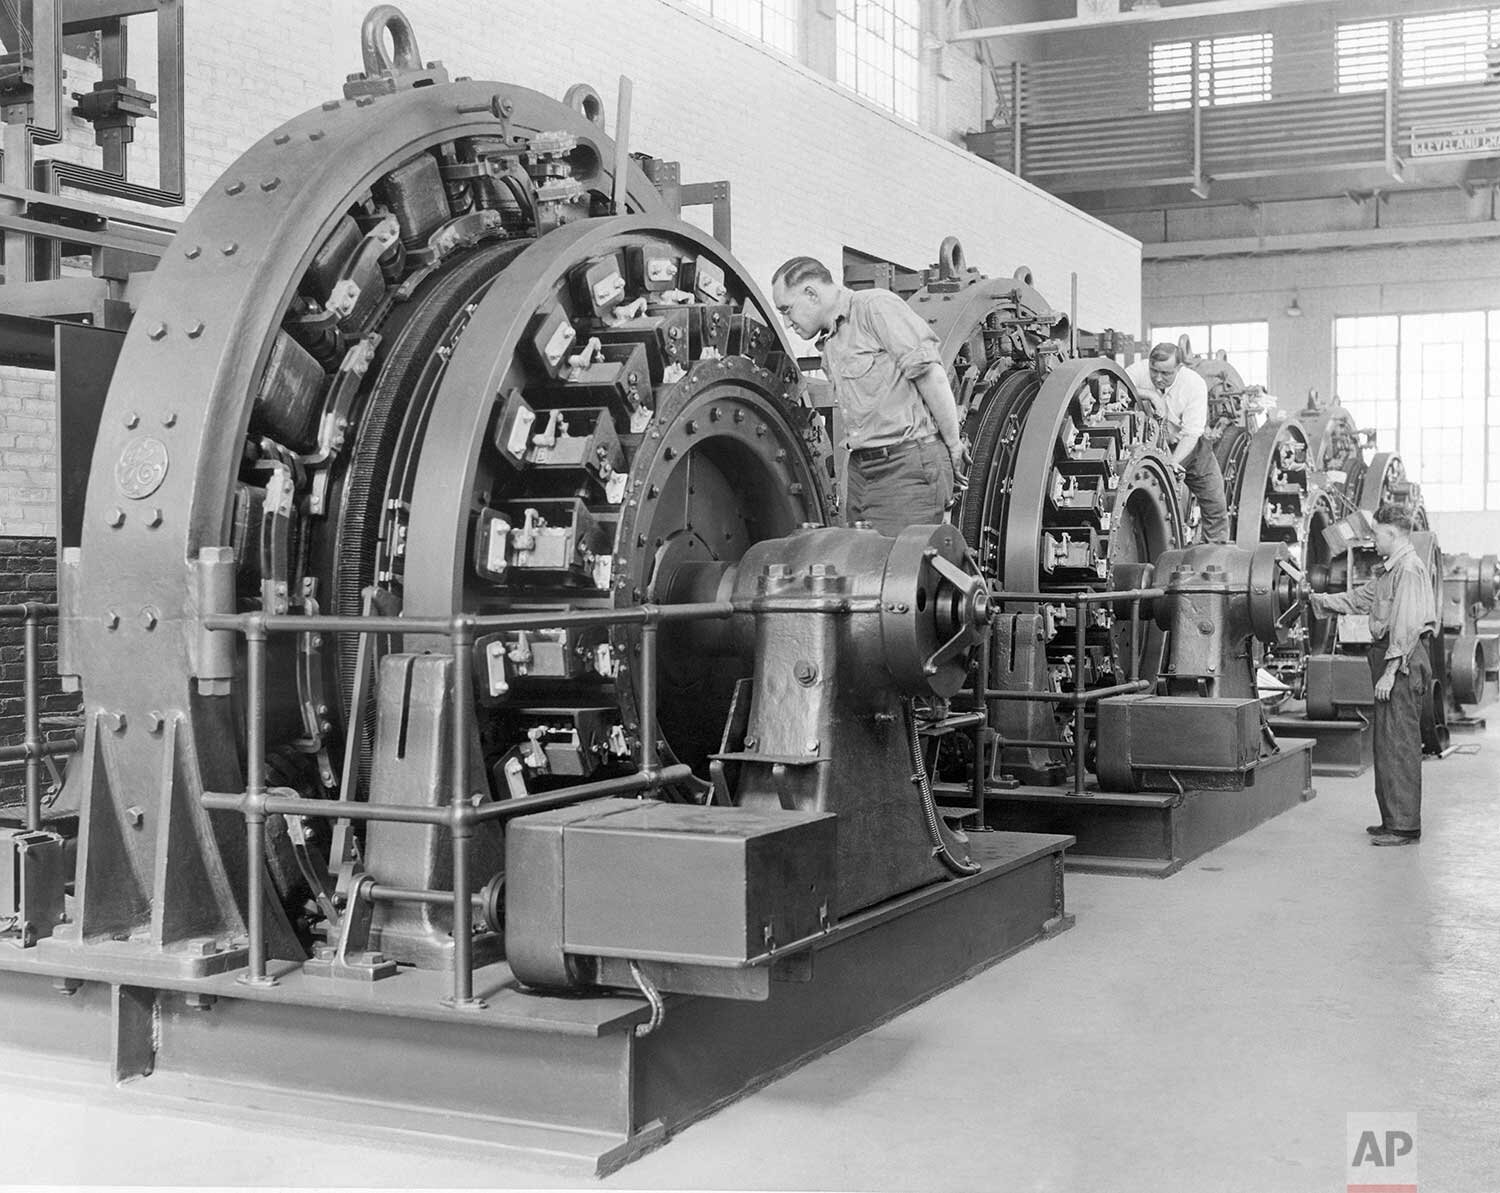  This four-rotary converters will produce 12,000 kilowatts when they are put into action for the running of the new Eighth Avenue subway system completed in New York, Oct. 13, 1931. Although the ventilating system of the new subway has not yet been f